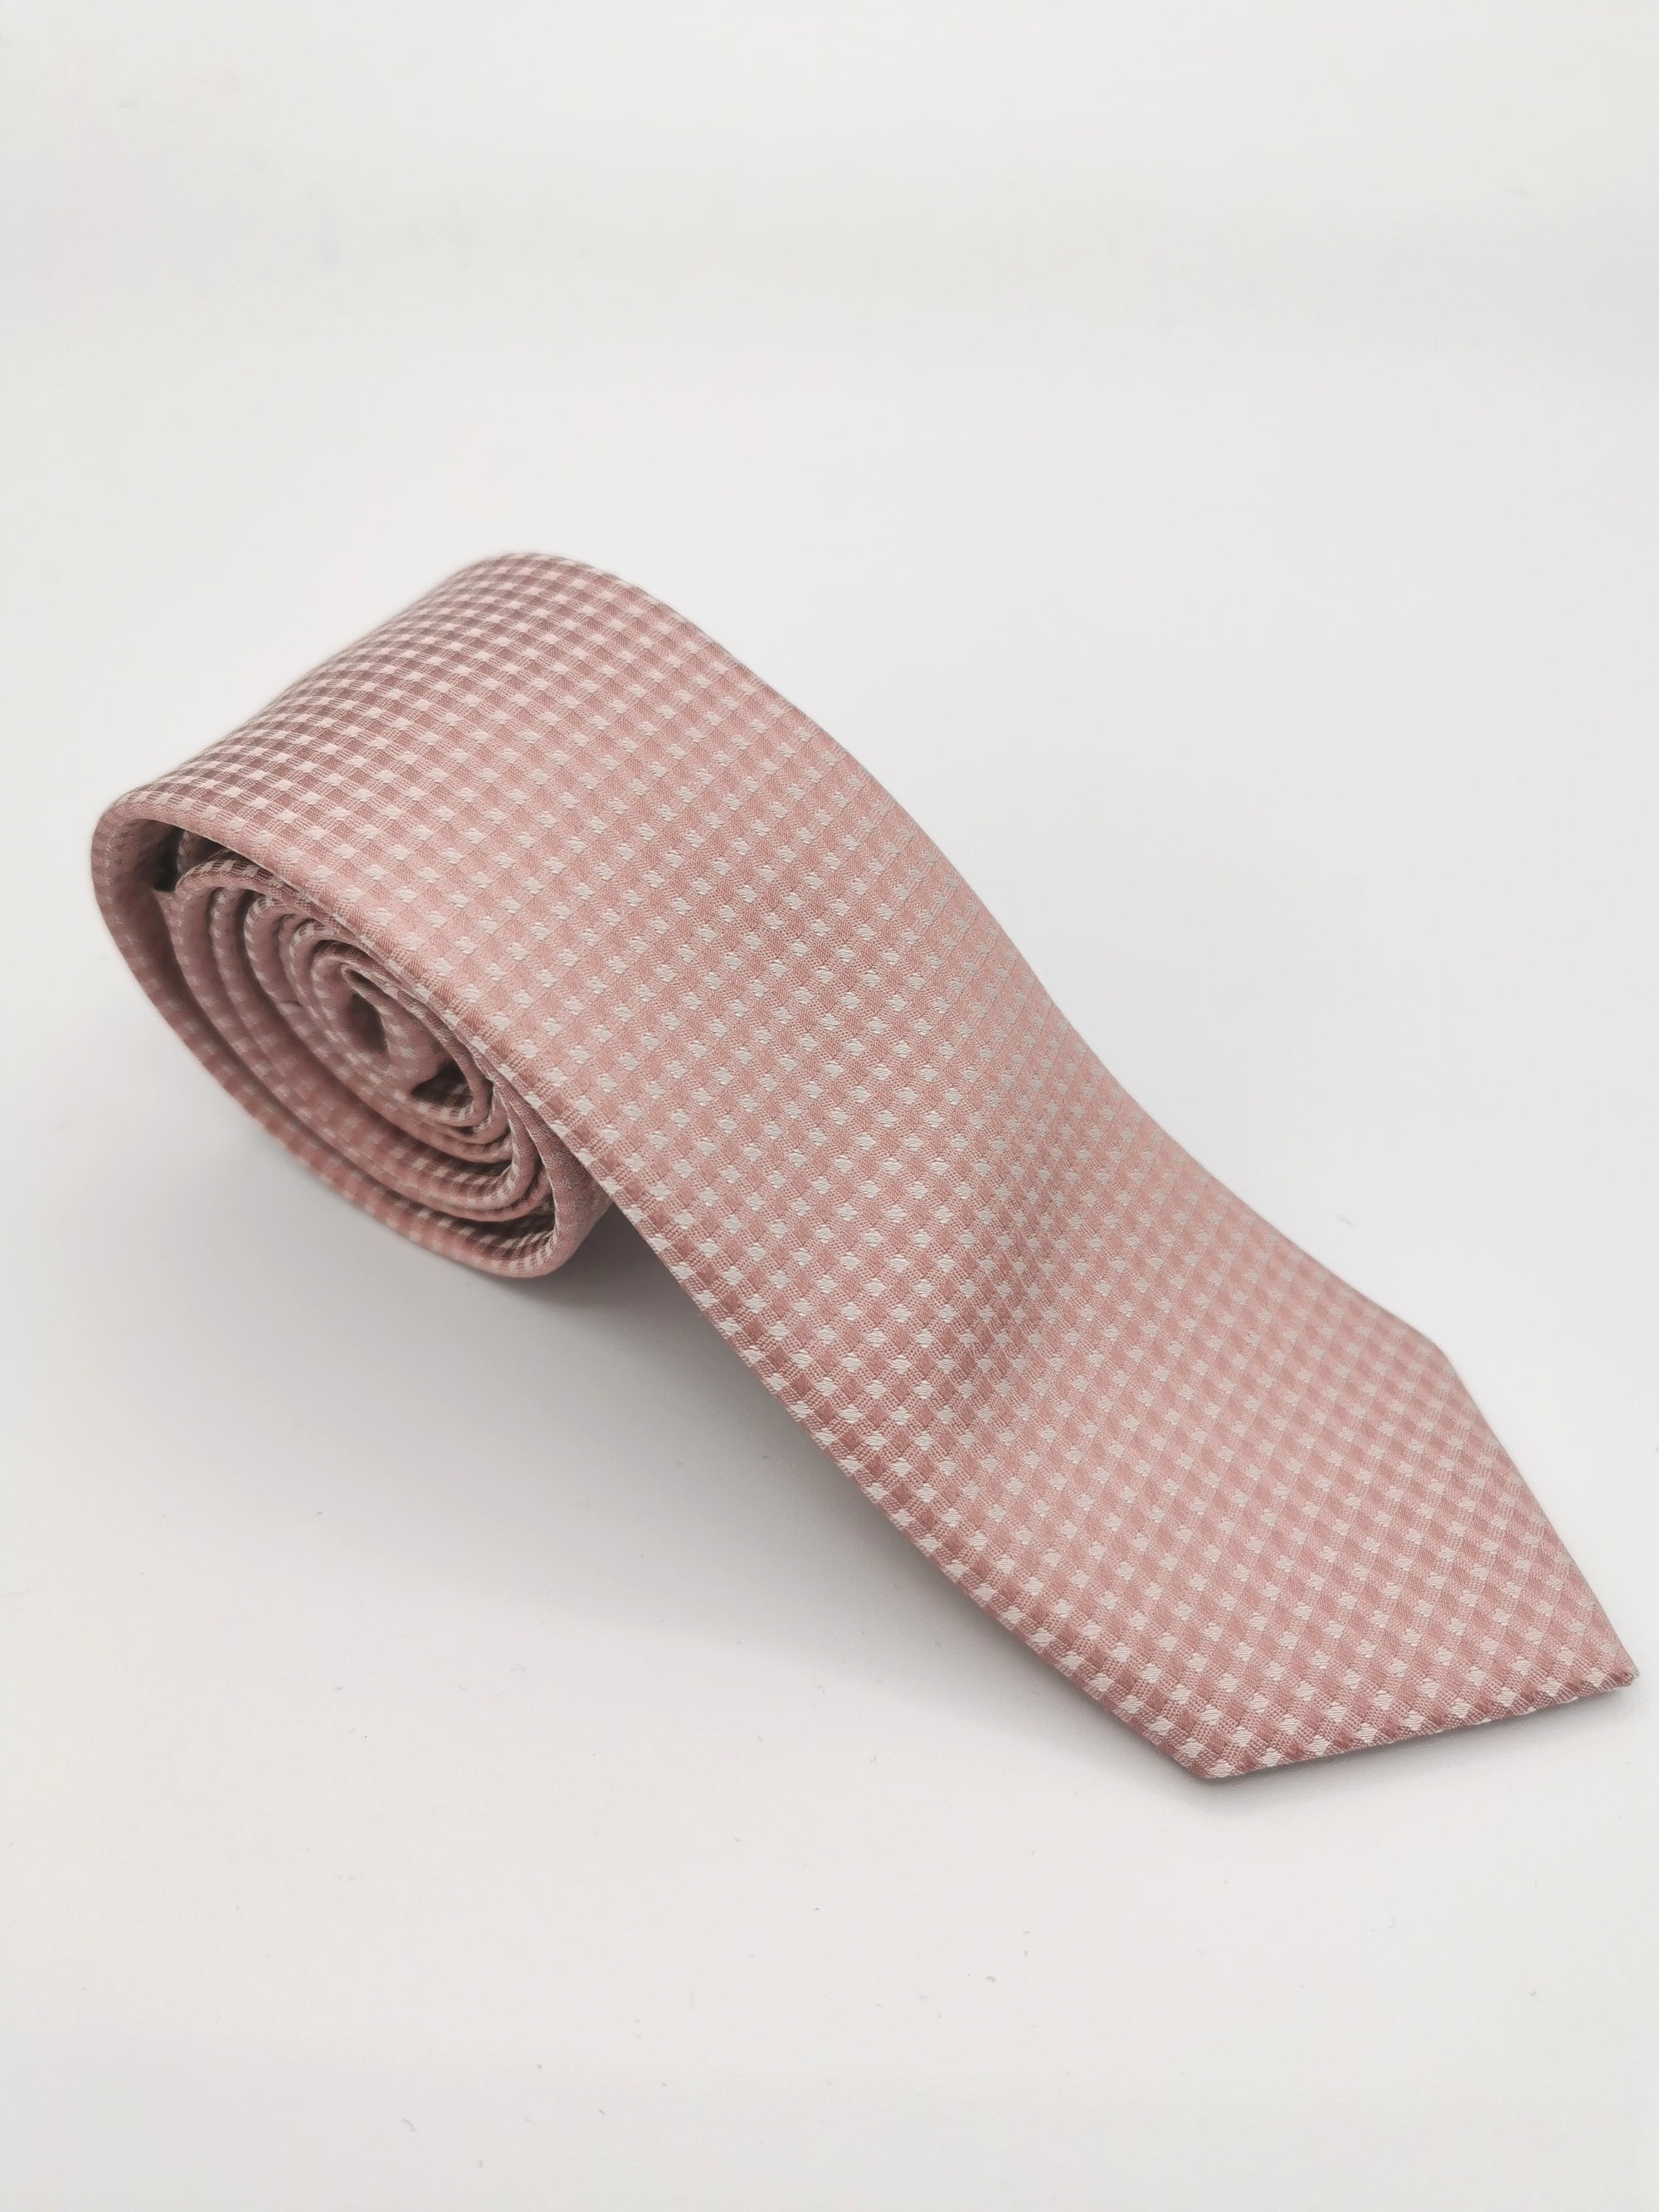 Silk tie with small pink checks